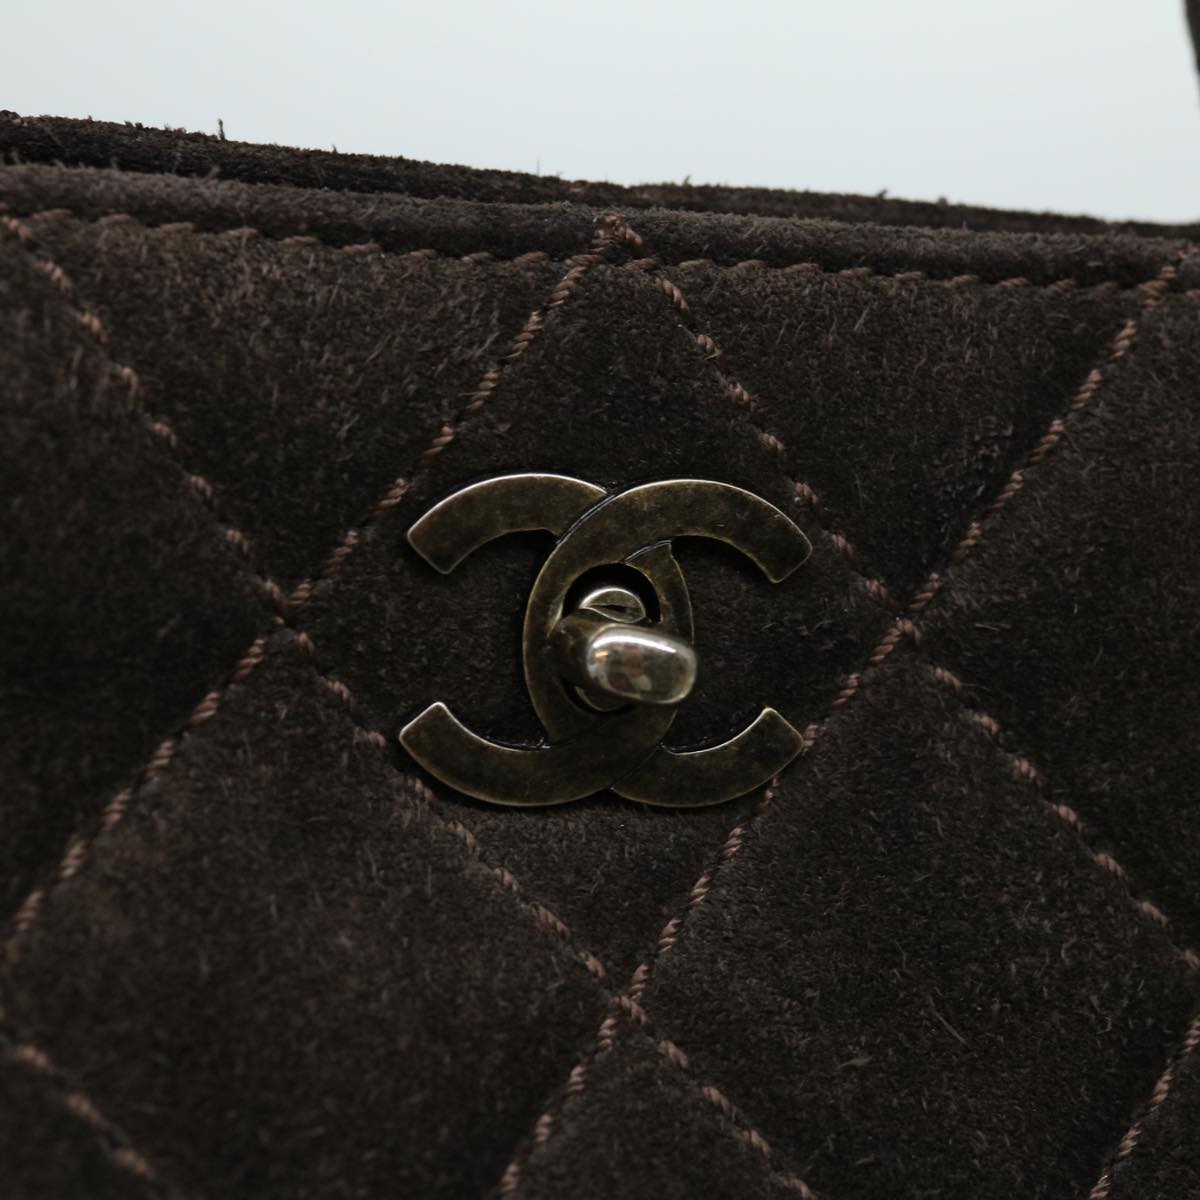 CHANEL Hand Bag Suede Brown CC Auth 67595